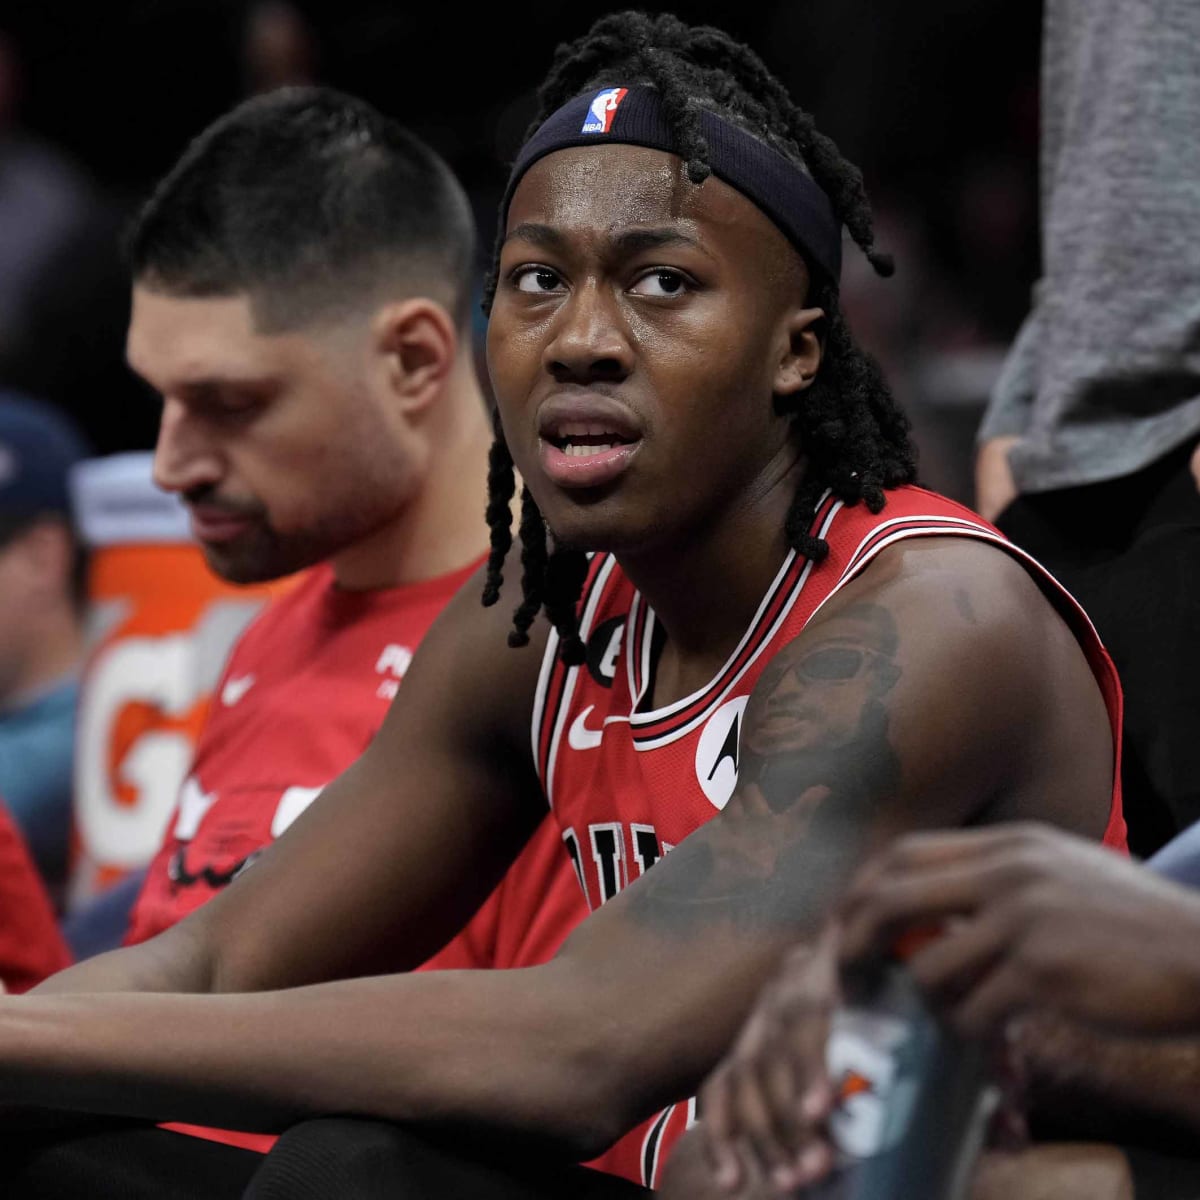 Bulls' Ayo Dosunmu is just another 'Chicago kid' defying the odds